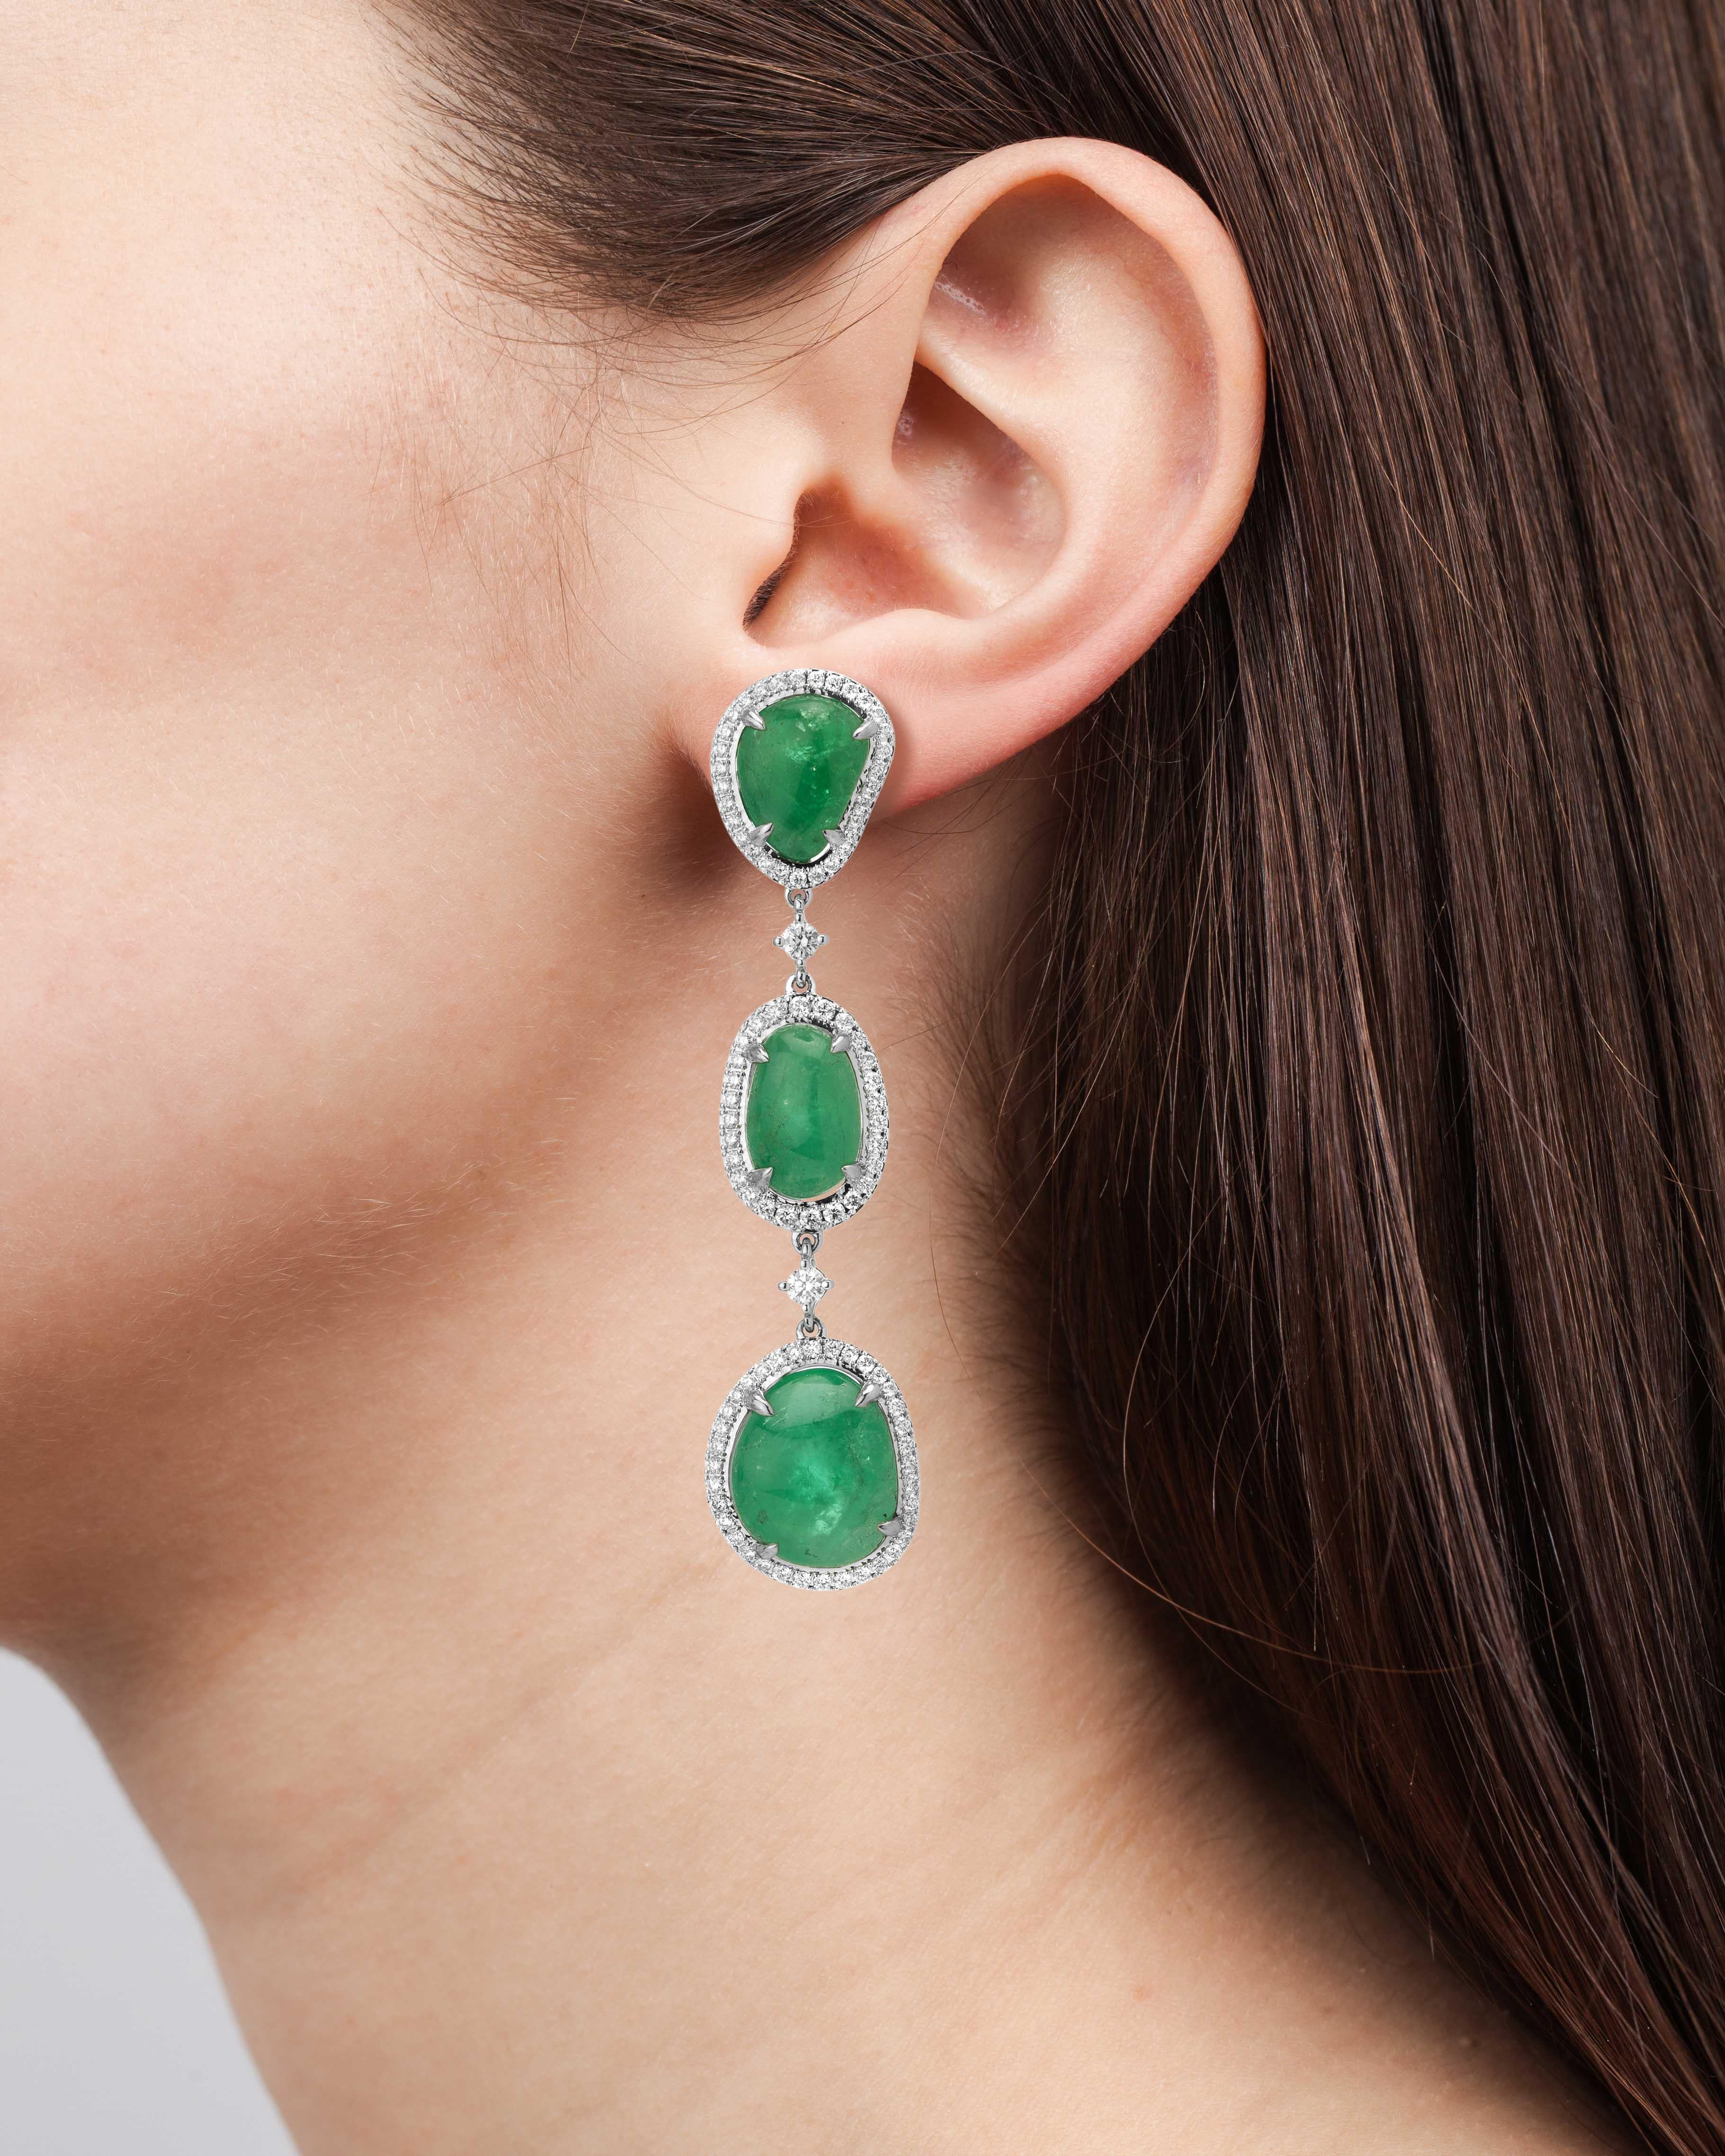 18 Karat white gold drop earrings set with alternating Muzo Colombian emeralds of 49.21 carats and single set diamonds weighting 2.43 carats.

Muzo Emerald Colombia Heritage Verity Earrings set with 49.21 carats Emerald.

Verity is a tribute to the